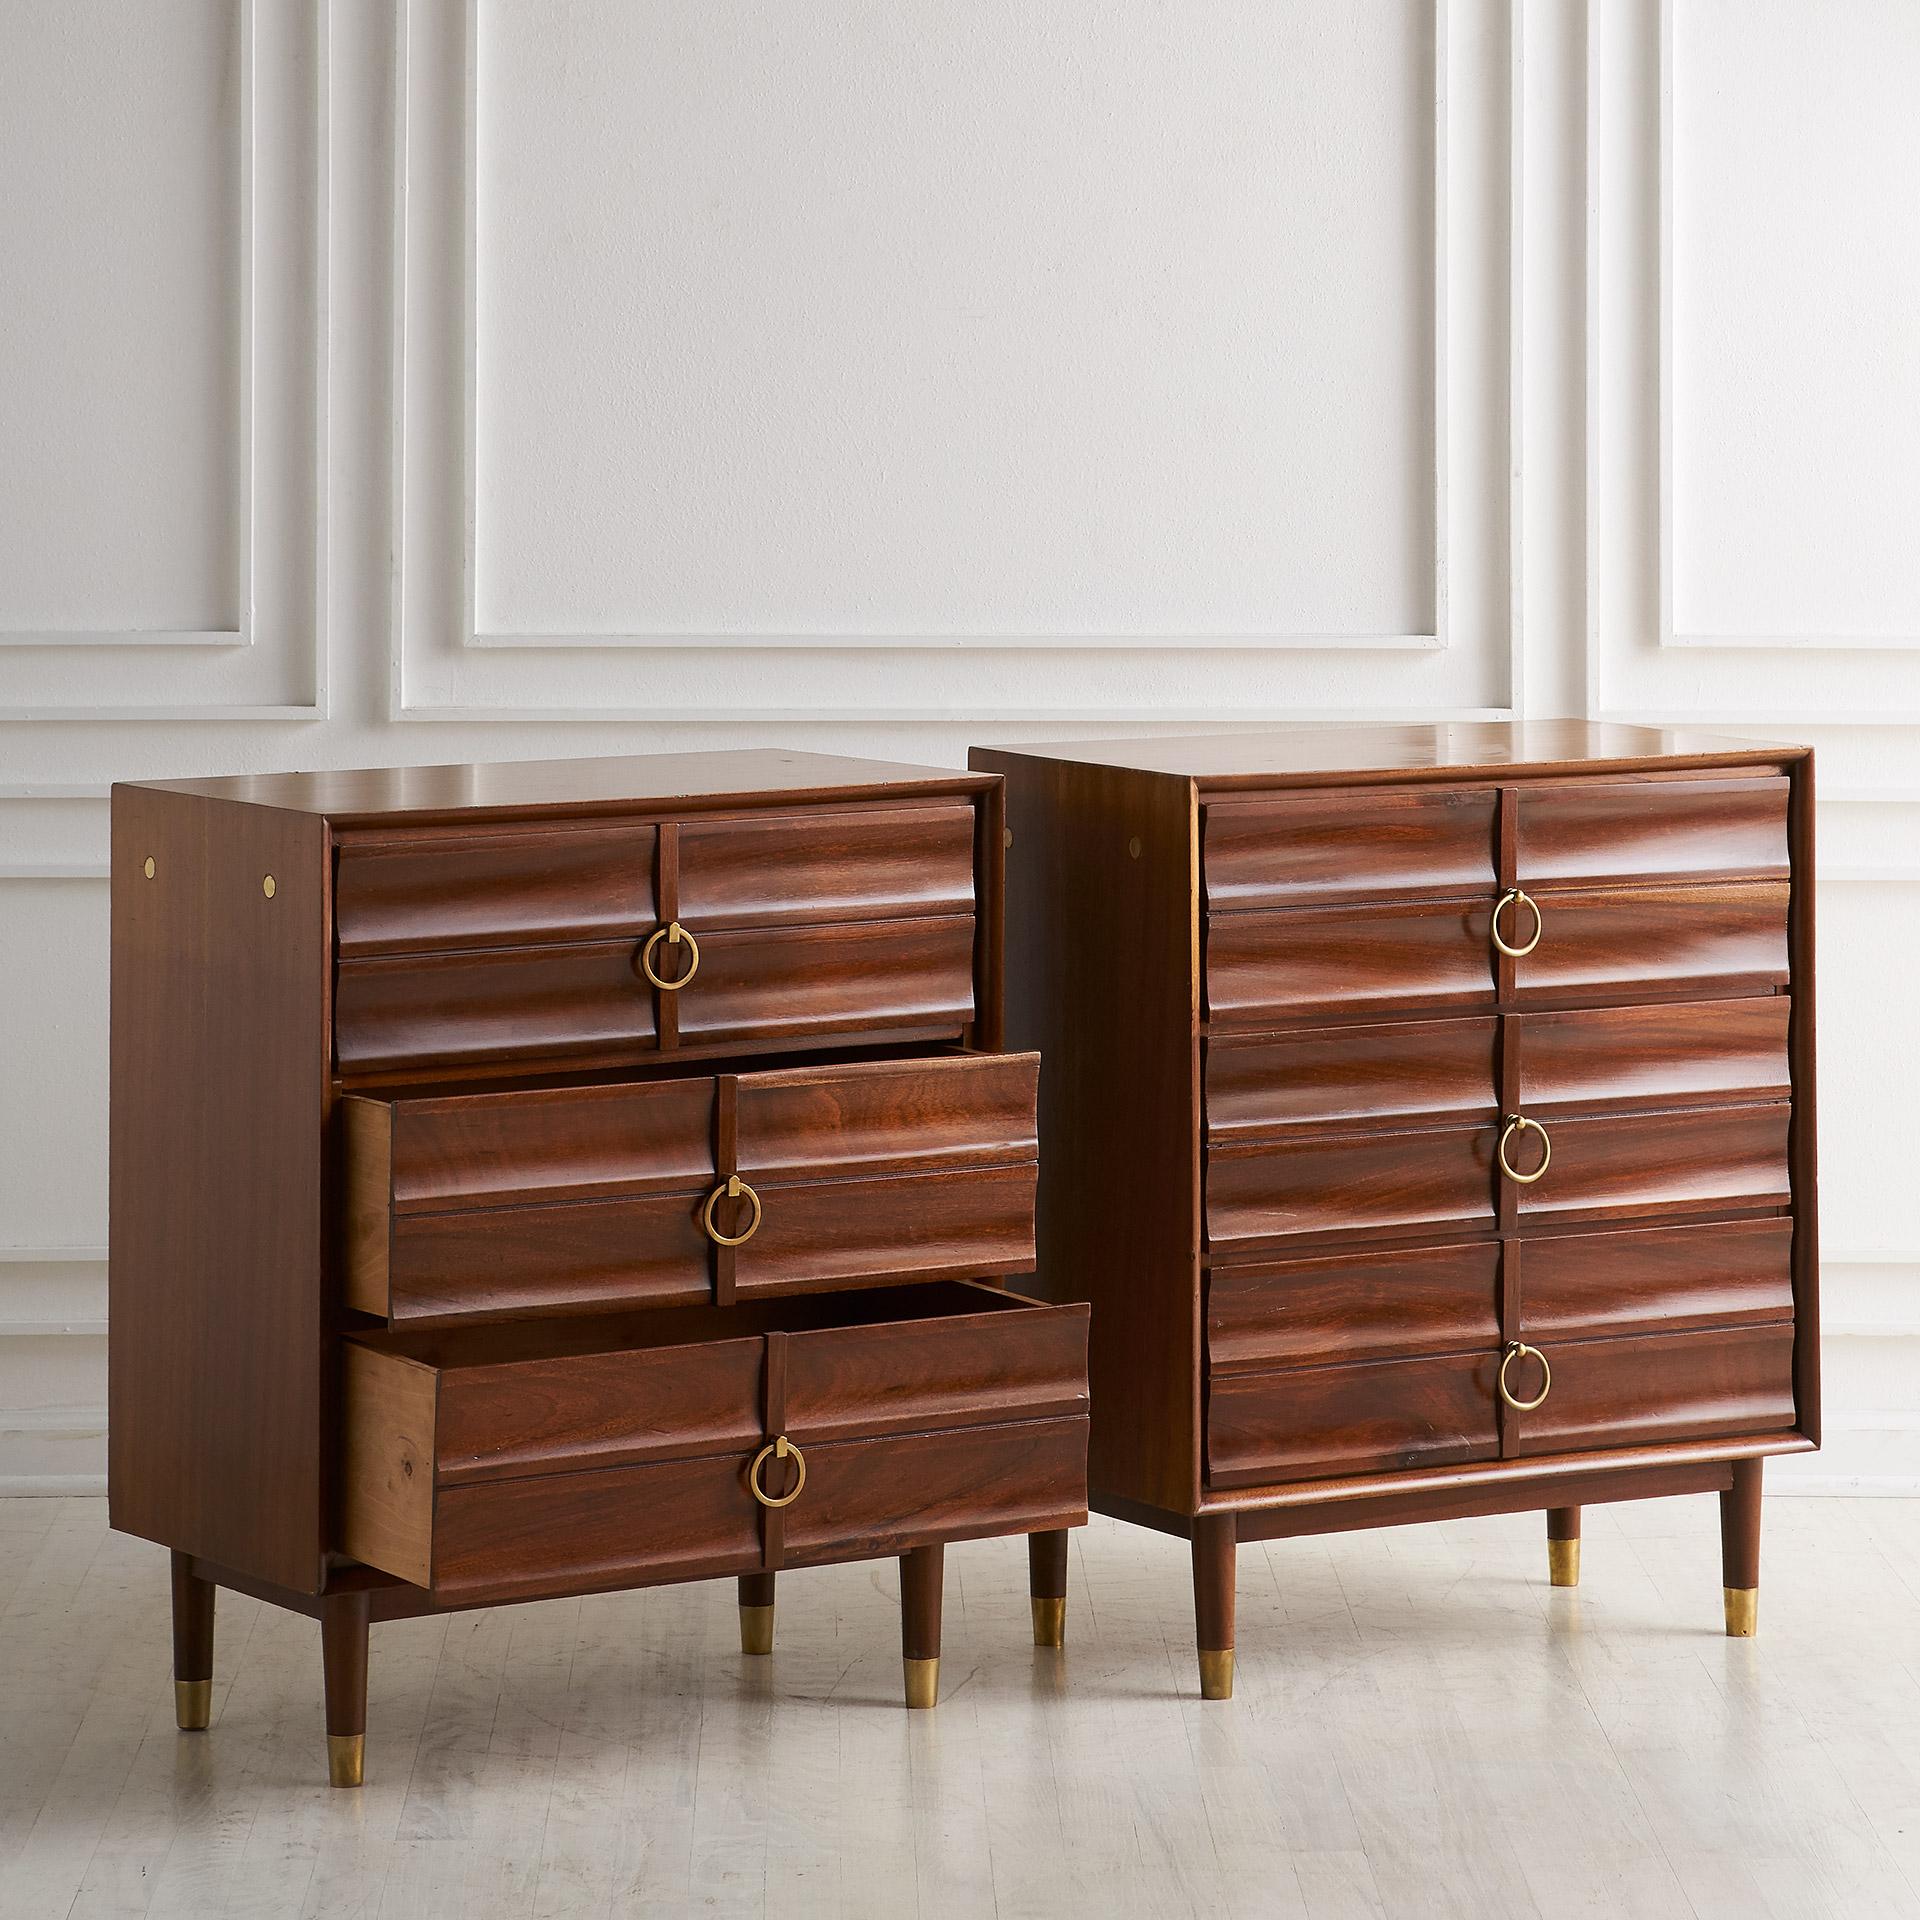 A pair of Mid-Century Modern three-drawer cabinets featuring curved drawer fronts with brass rings circa 1960. Nice inlaid brass detail on the sides and on the leg caps as well.